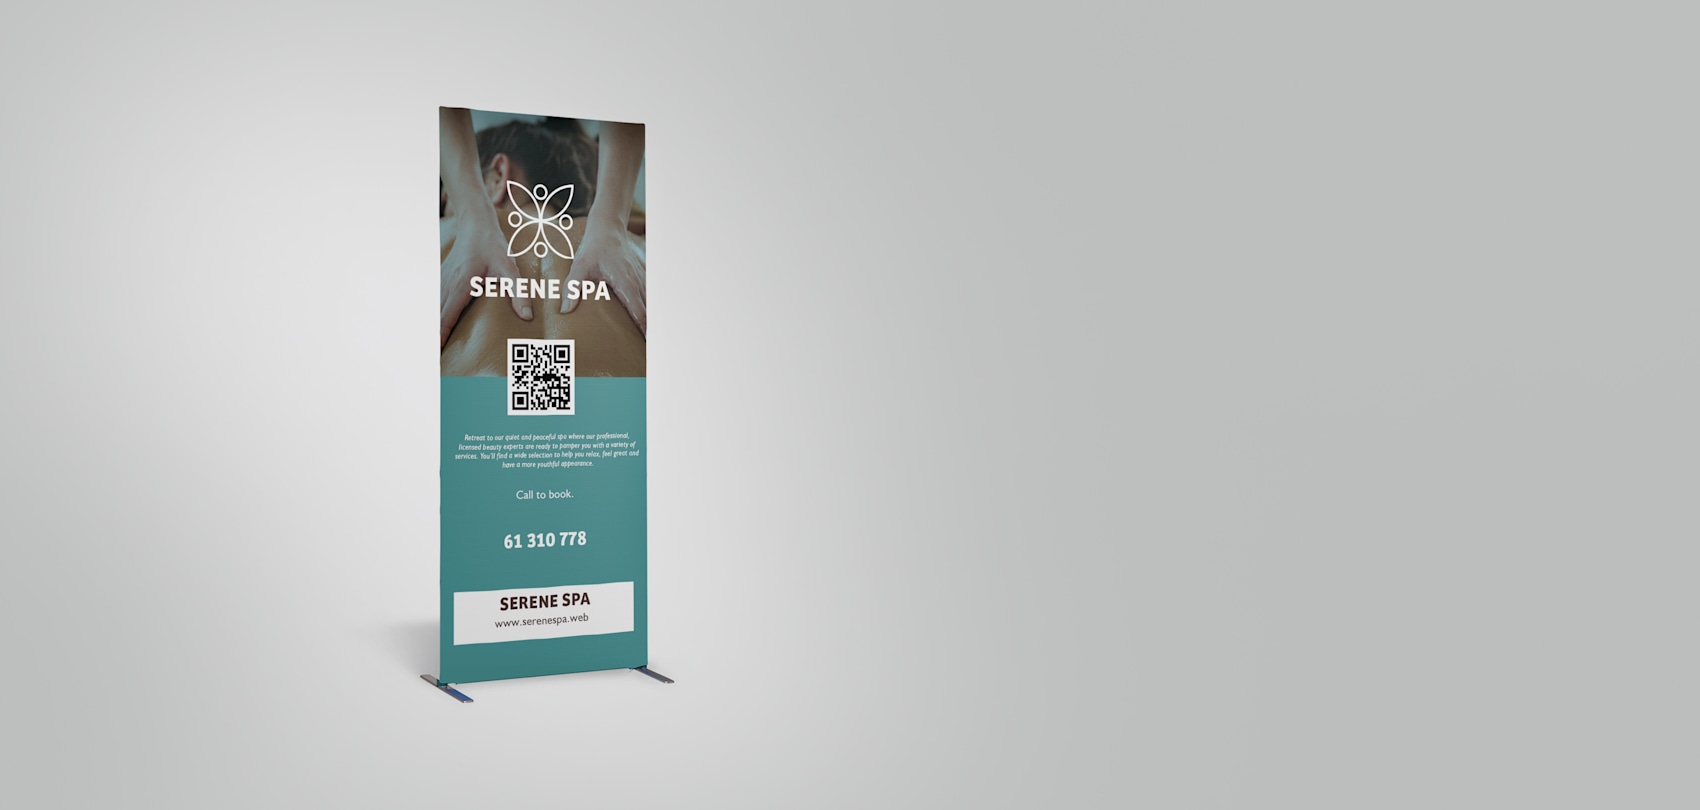 Larger version: Custom tube banner stand with contact information and QR code